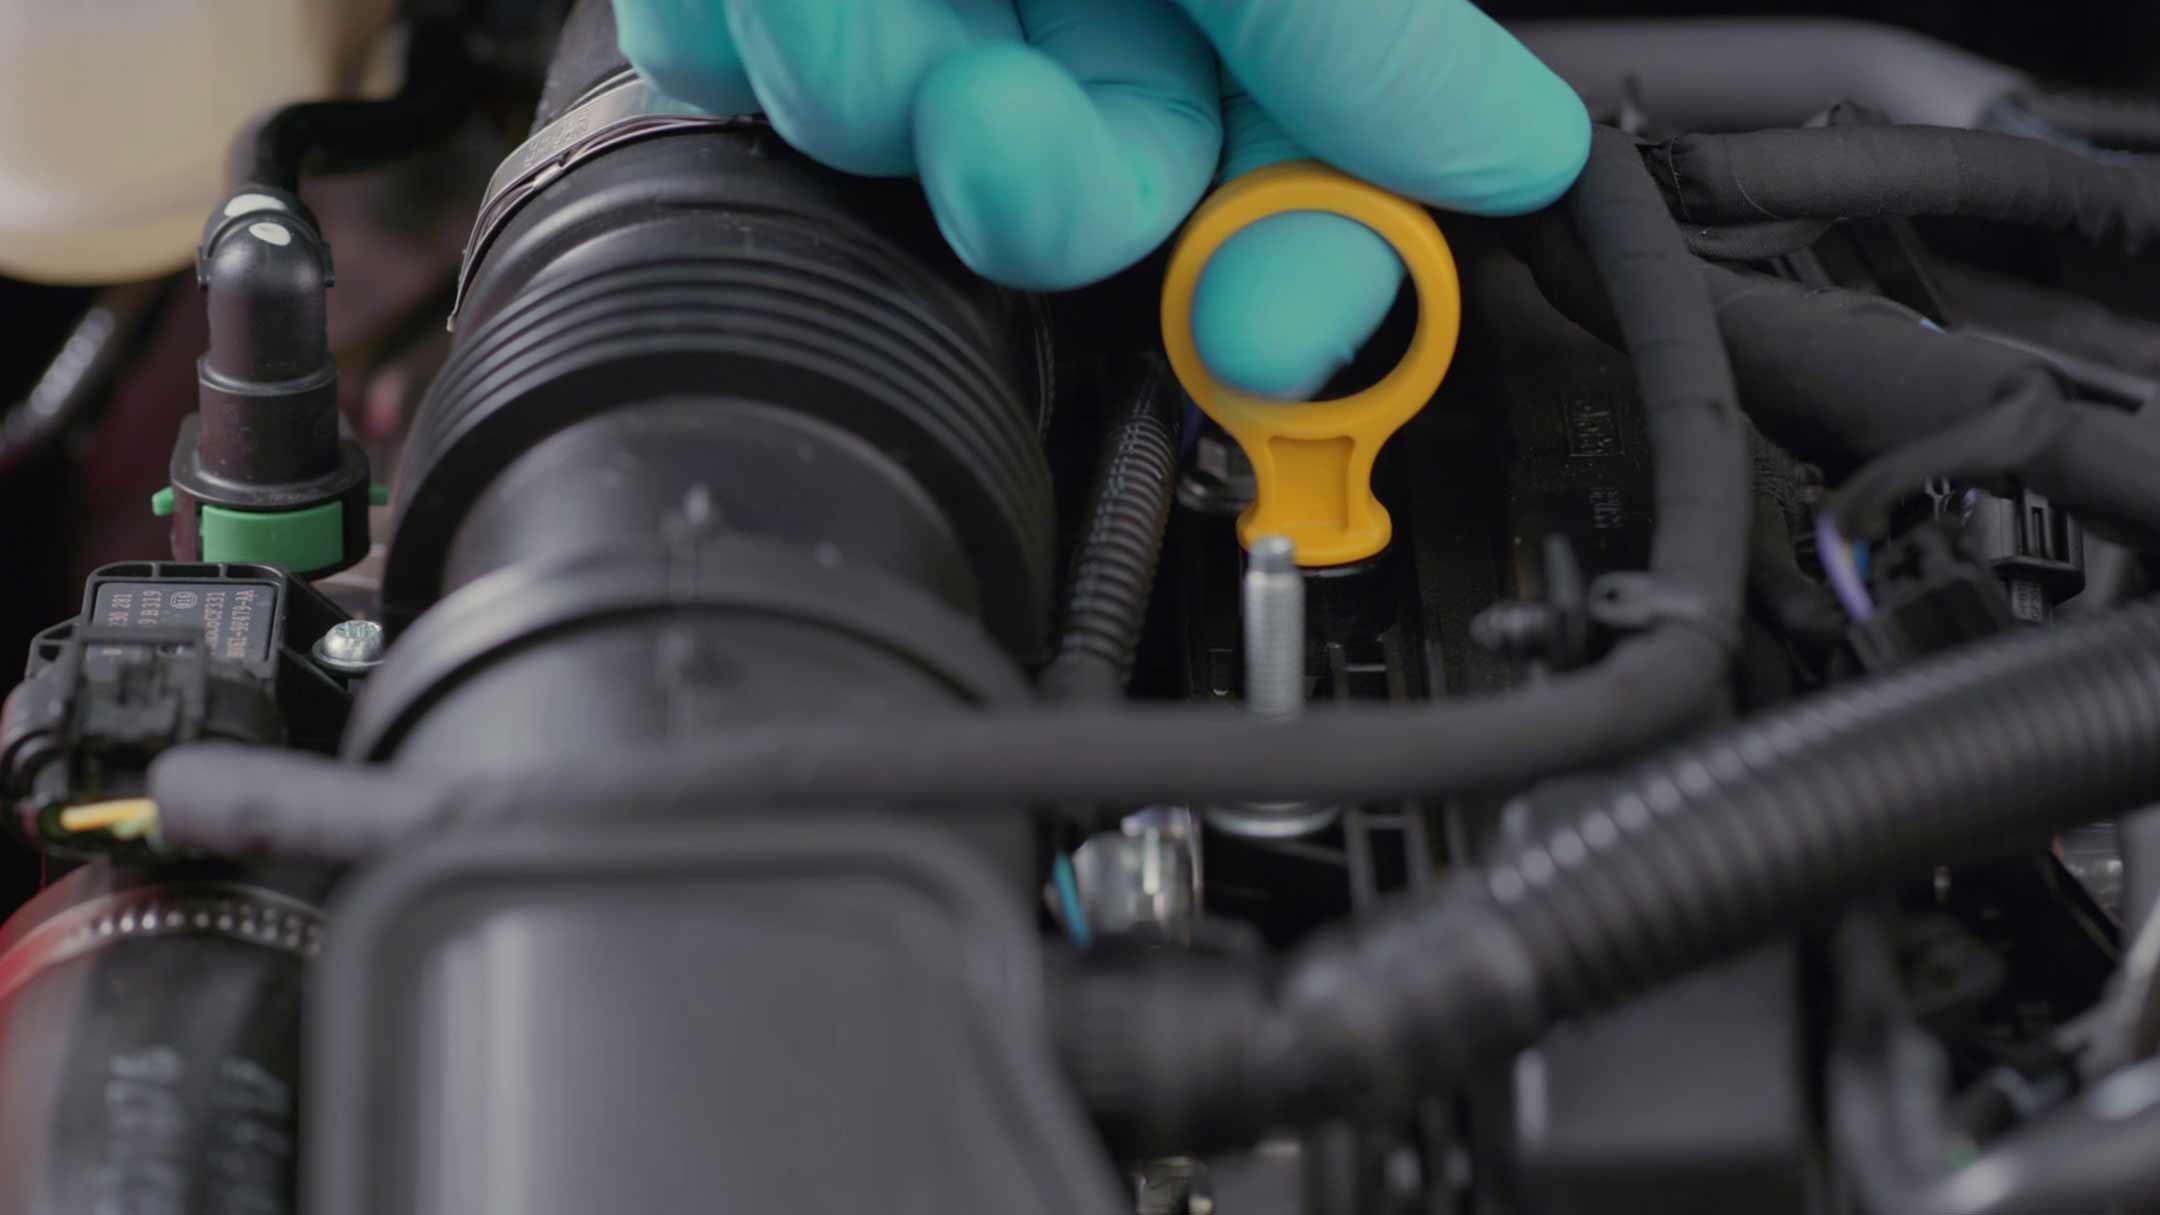 HOW TO CHECK AND TOP-UP YOUR OIL LEVELS